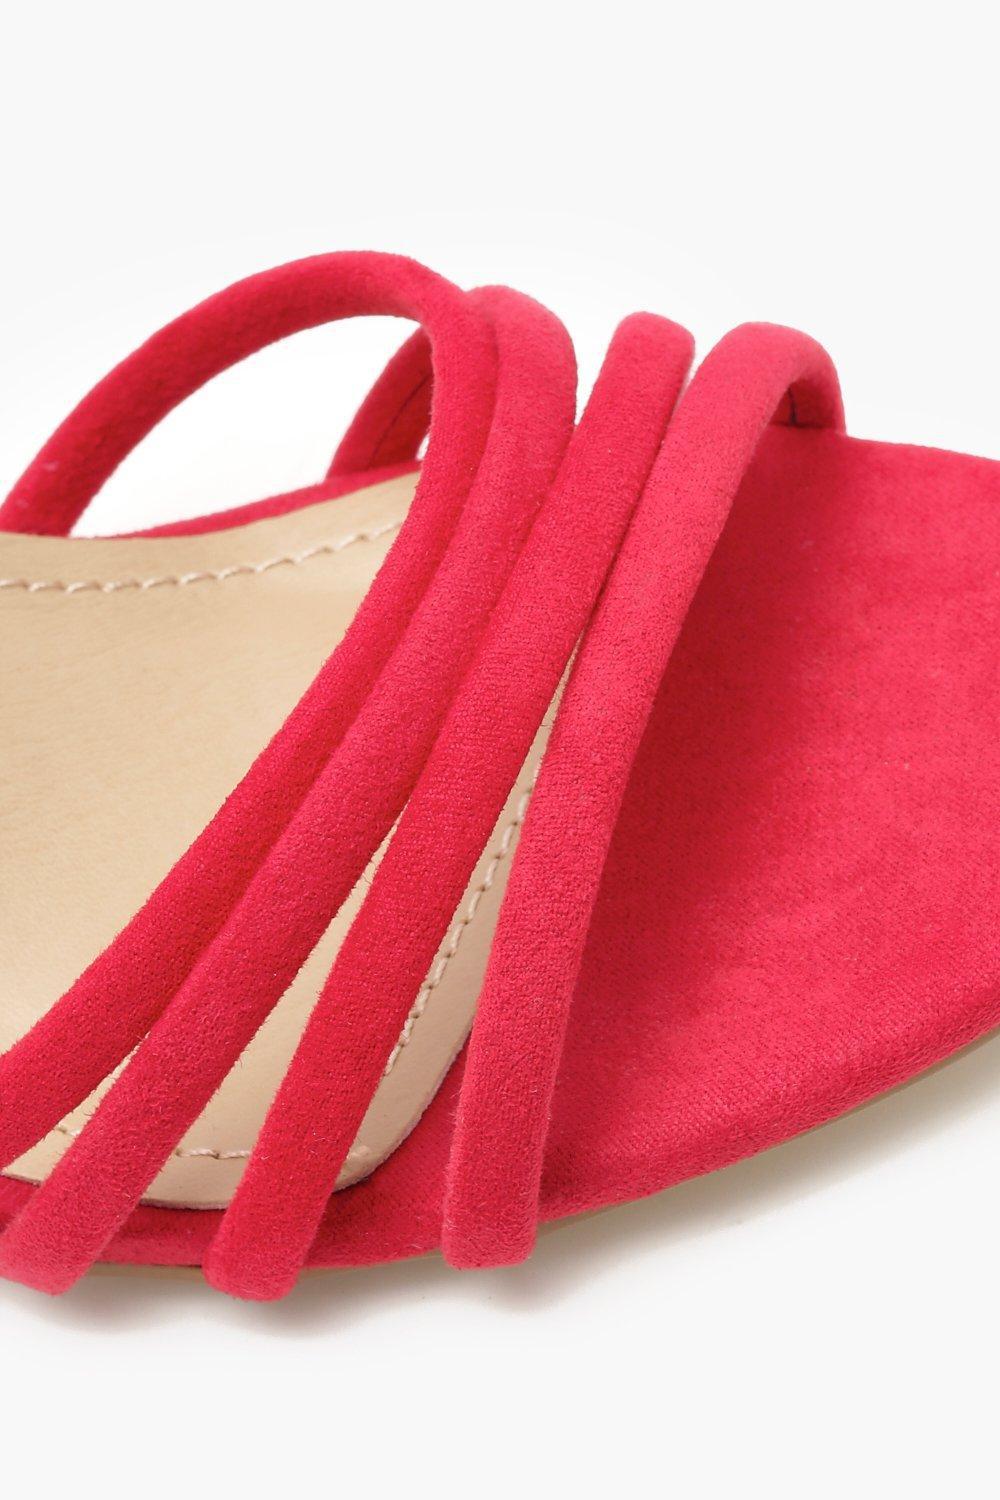 Boohoo Suede Strappy Low Block Heels in Red - Lyst